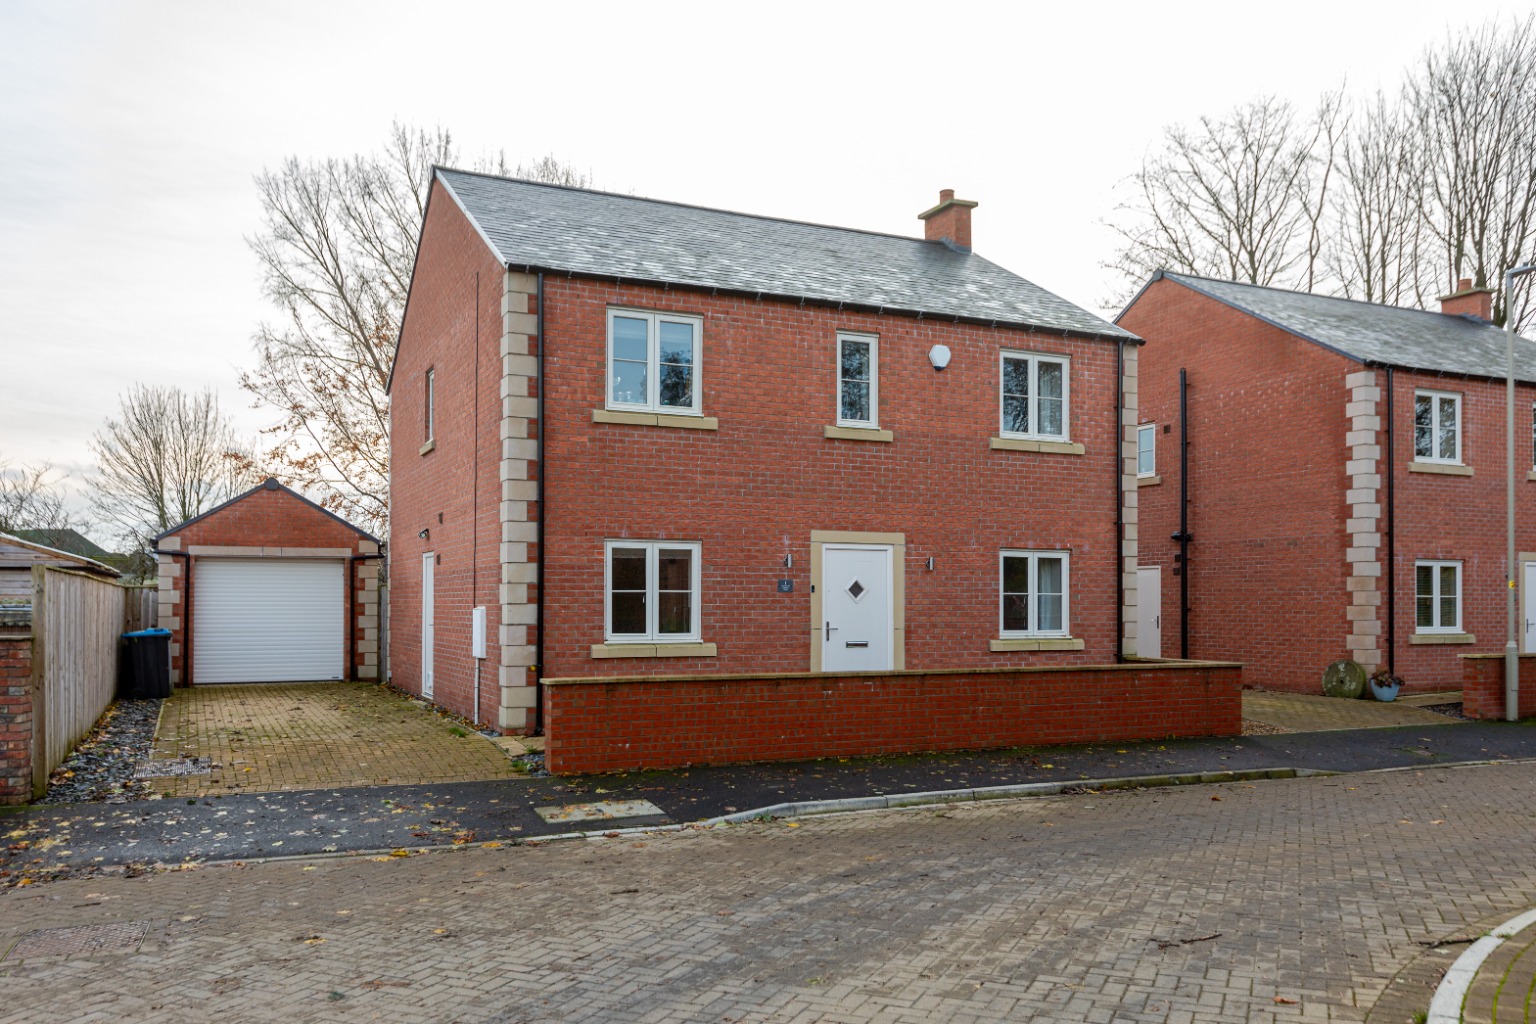 4 bed detached house to rent in Rokesby Place, Thirsk - Property Image 1